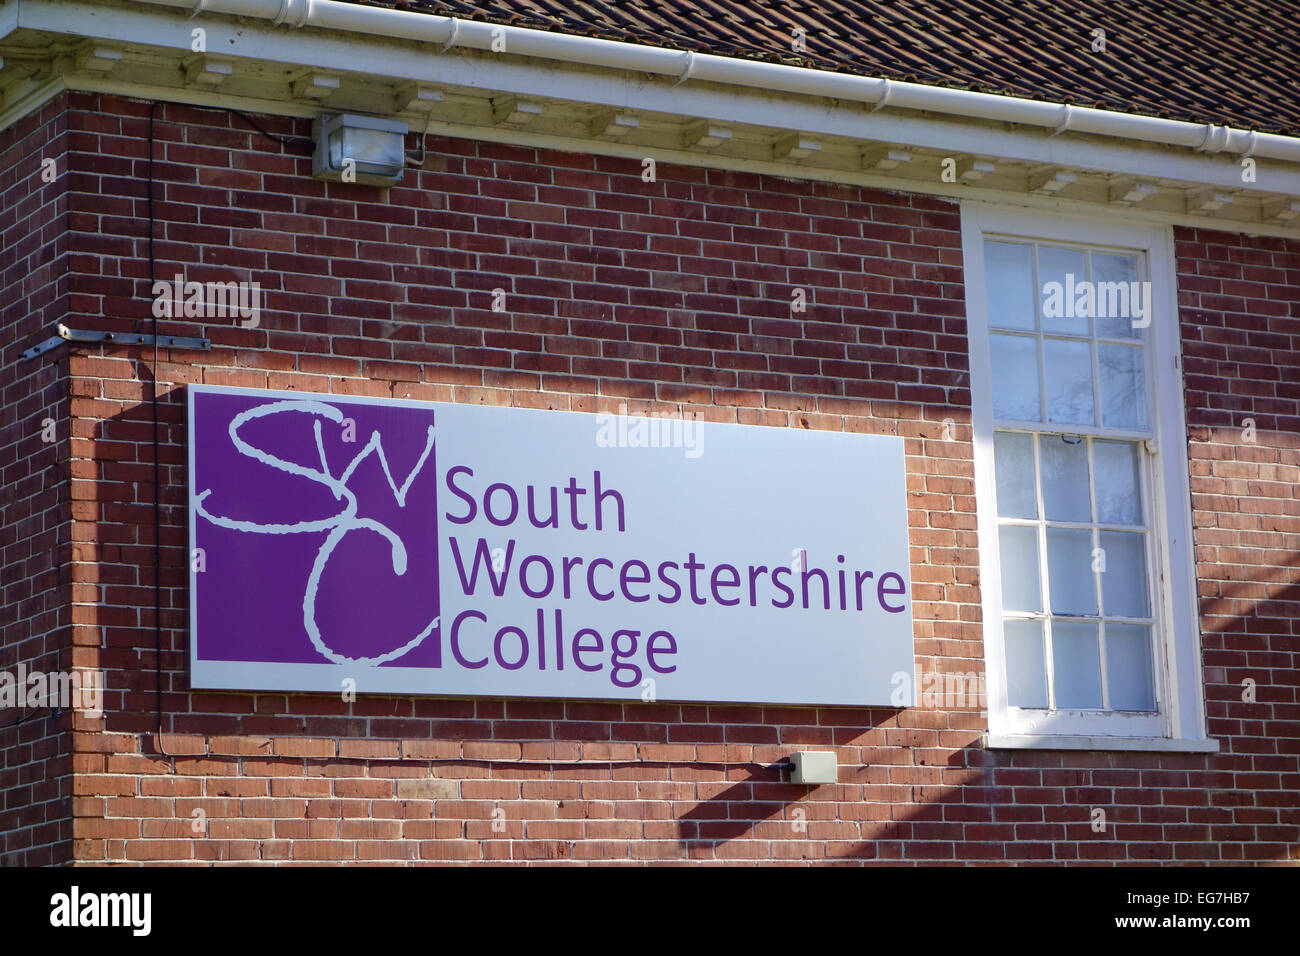 South Worcestershire College, Great Malvern Campus, Albert Road North, Great Malvern, Worcestershire, England, UK Stock Photo